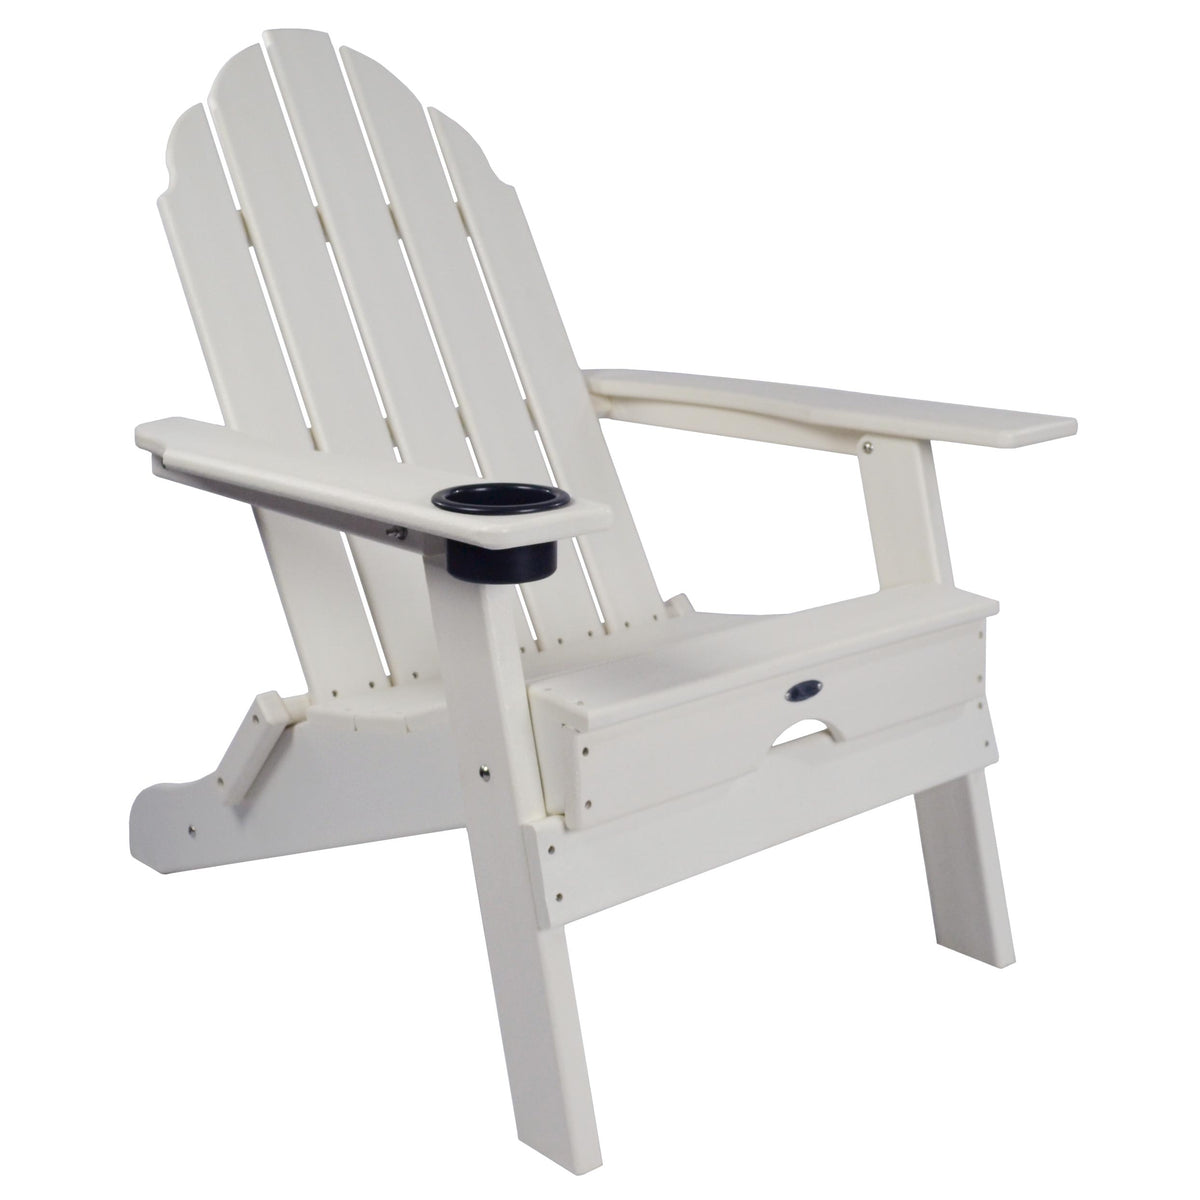 Atlas Patio Furniture - Beach Haven Resin Adirondack Folding Chair with Cup Holder - Color:  White